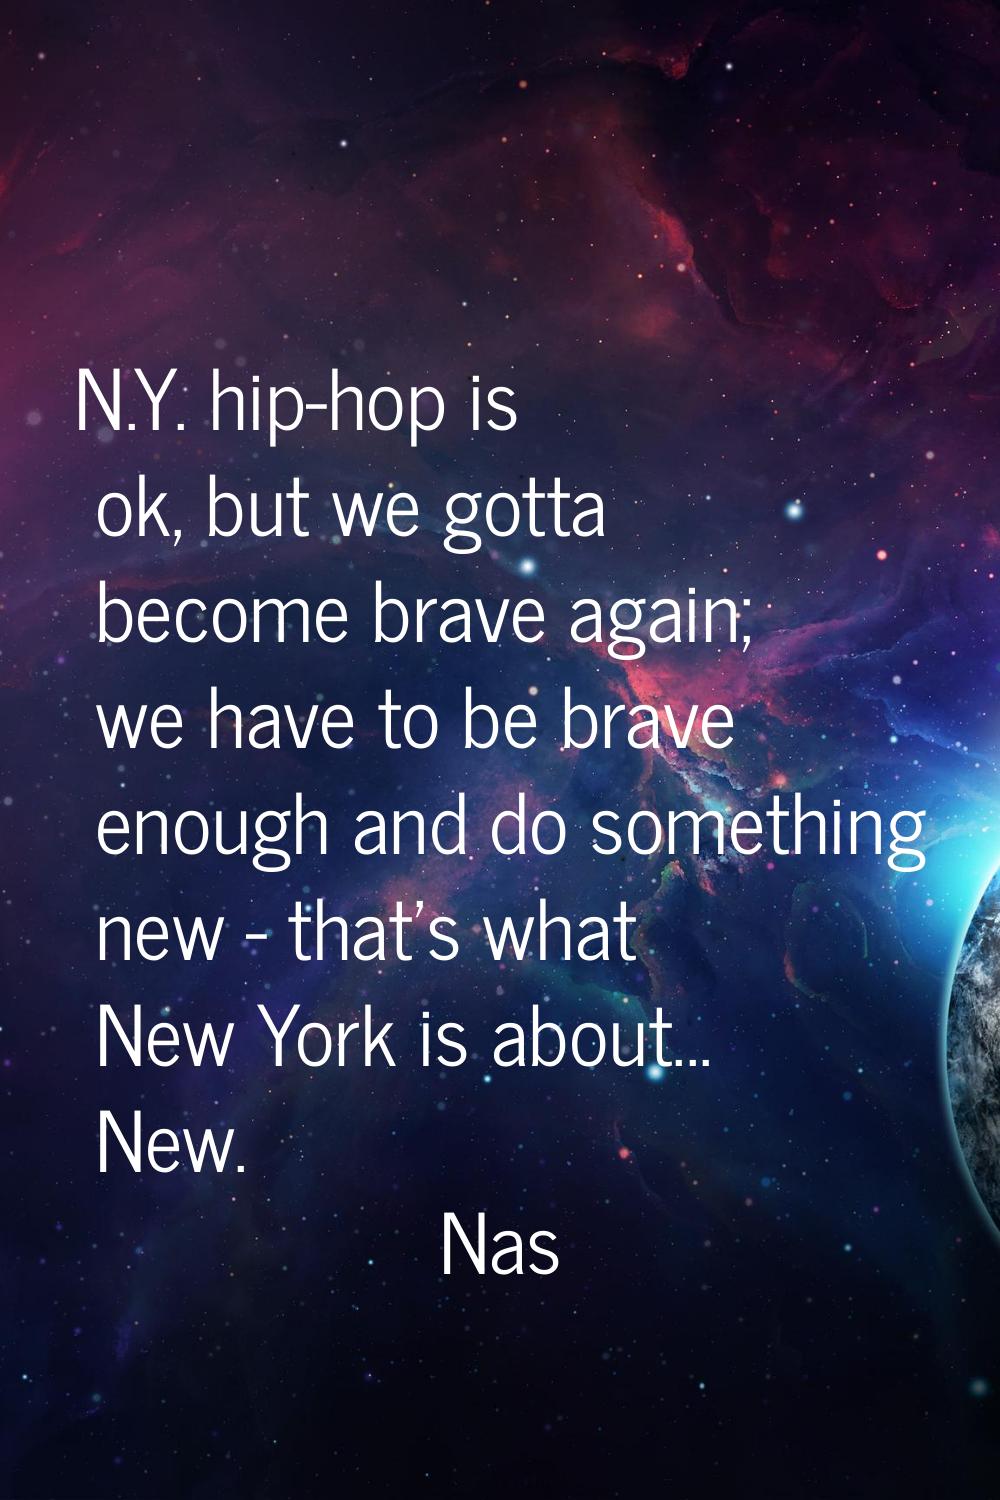 N.Y. hip-hop is ok, but we gotta become brave again; we have to be brave enough and do something ne